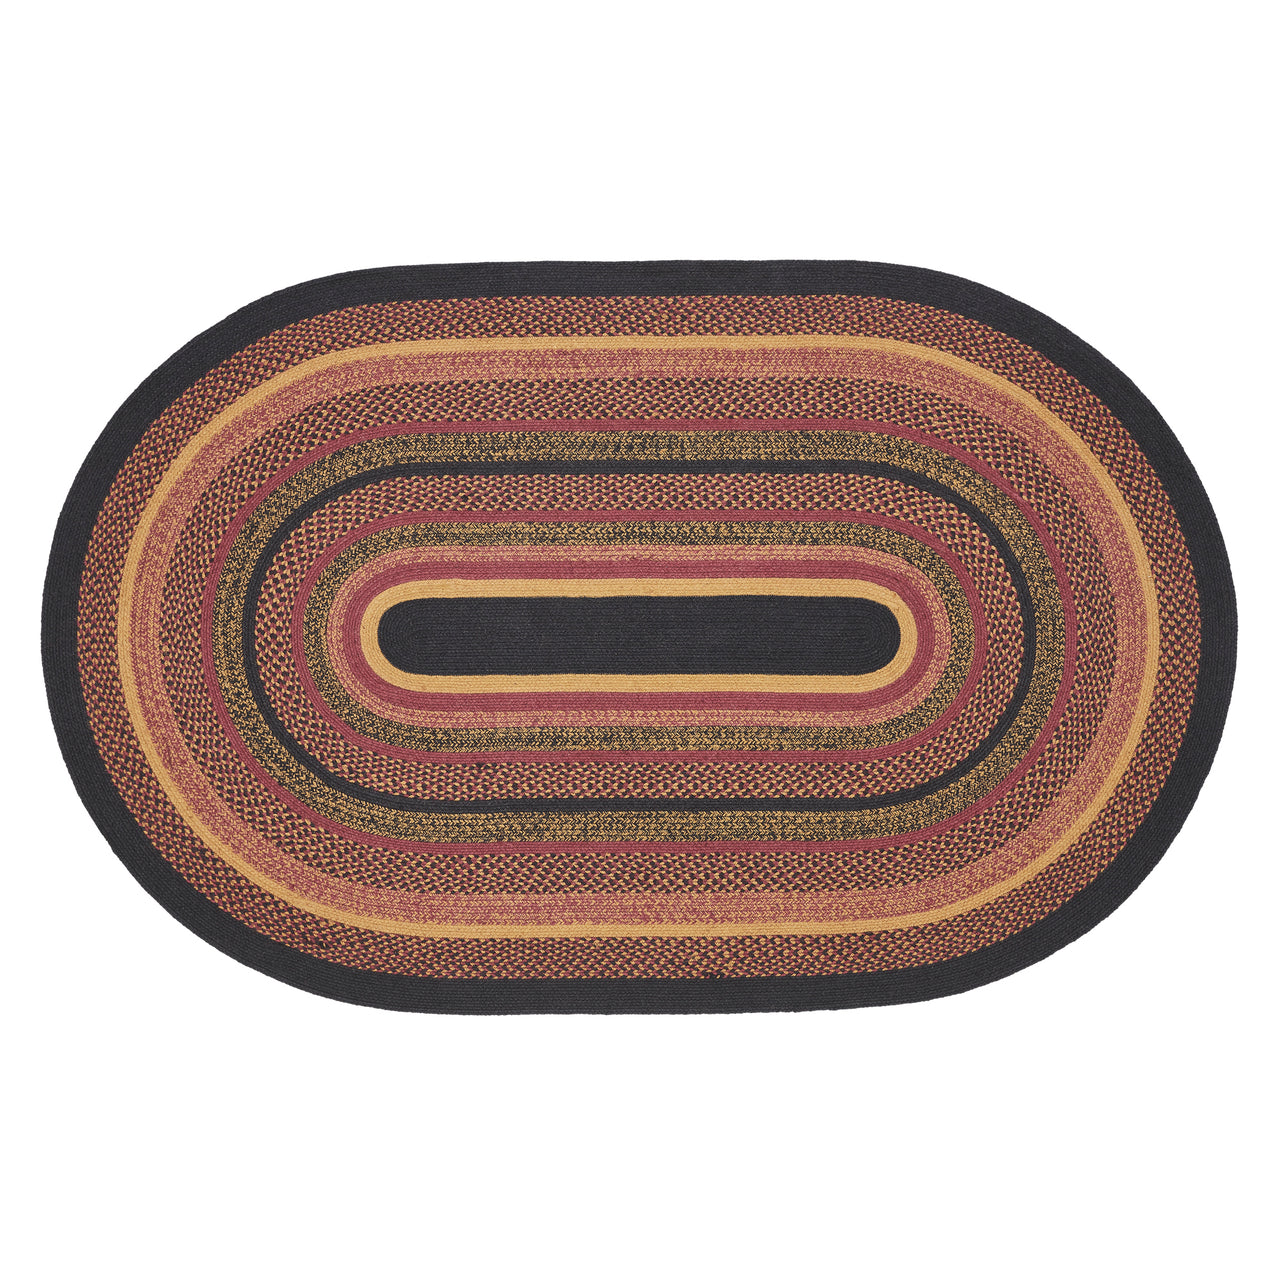 Heritage Farms Jute Braided Rug Oval with Rug Pad 5'x8' VHC Brands